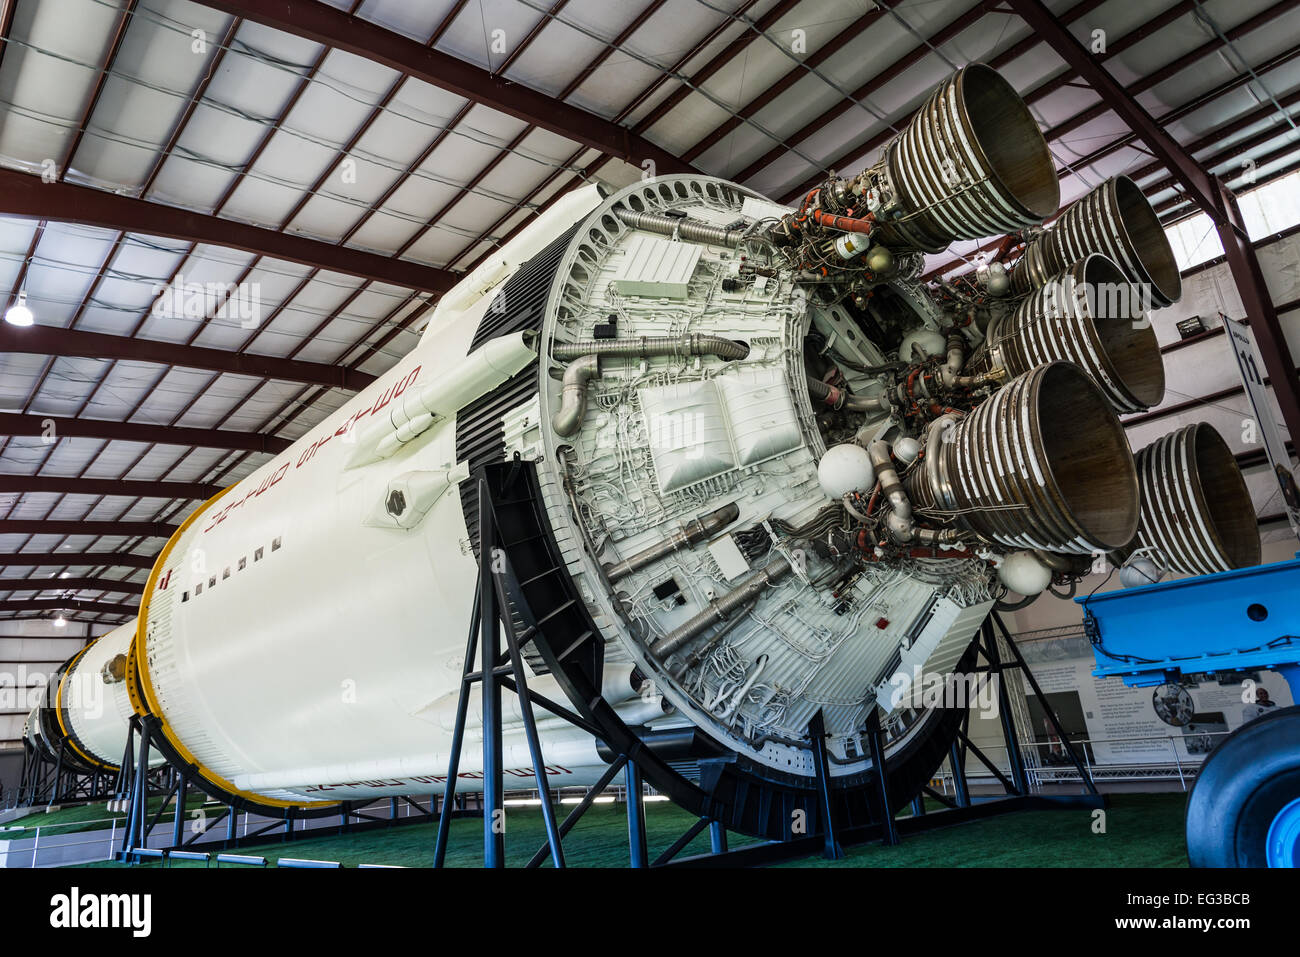 First stage of the Saturn V rocket and engines at NASA Johnson Space Center, Houston, Texas, USA. Stock Photo